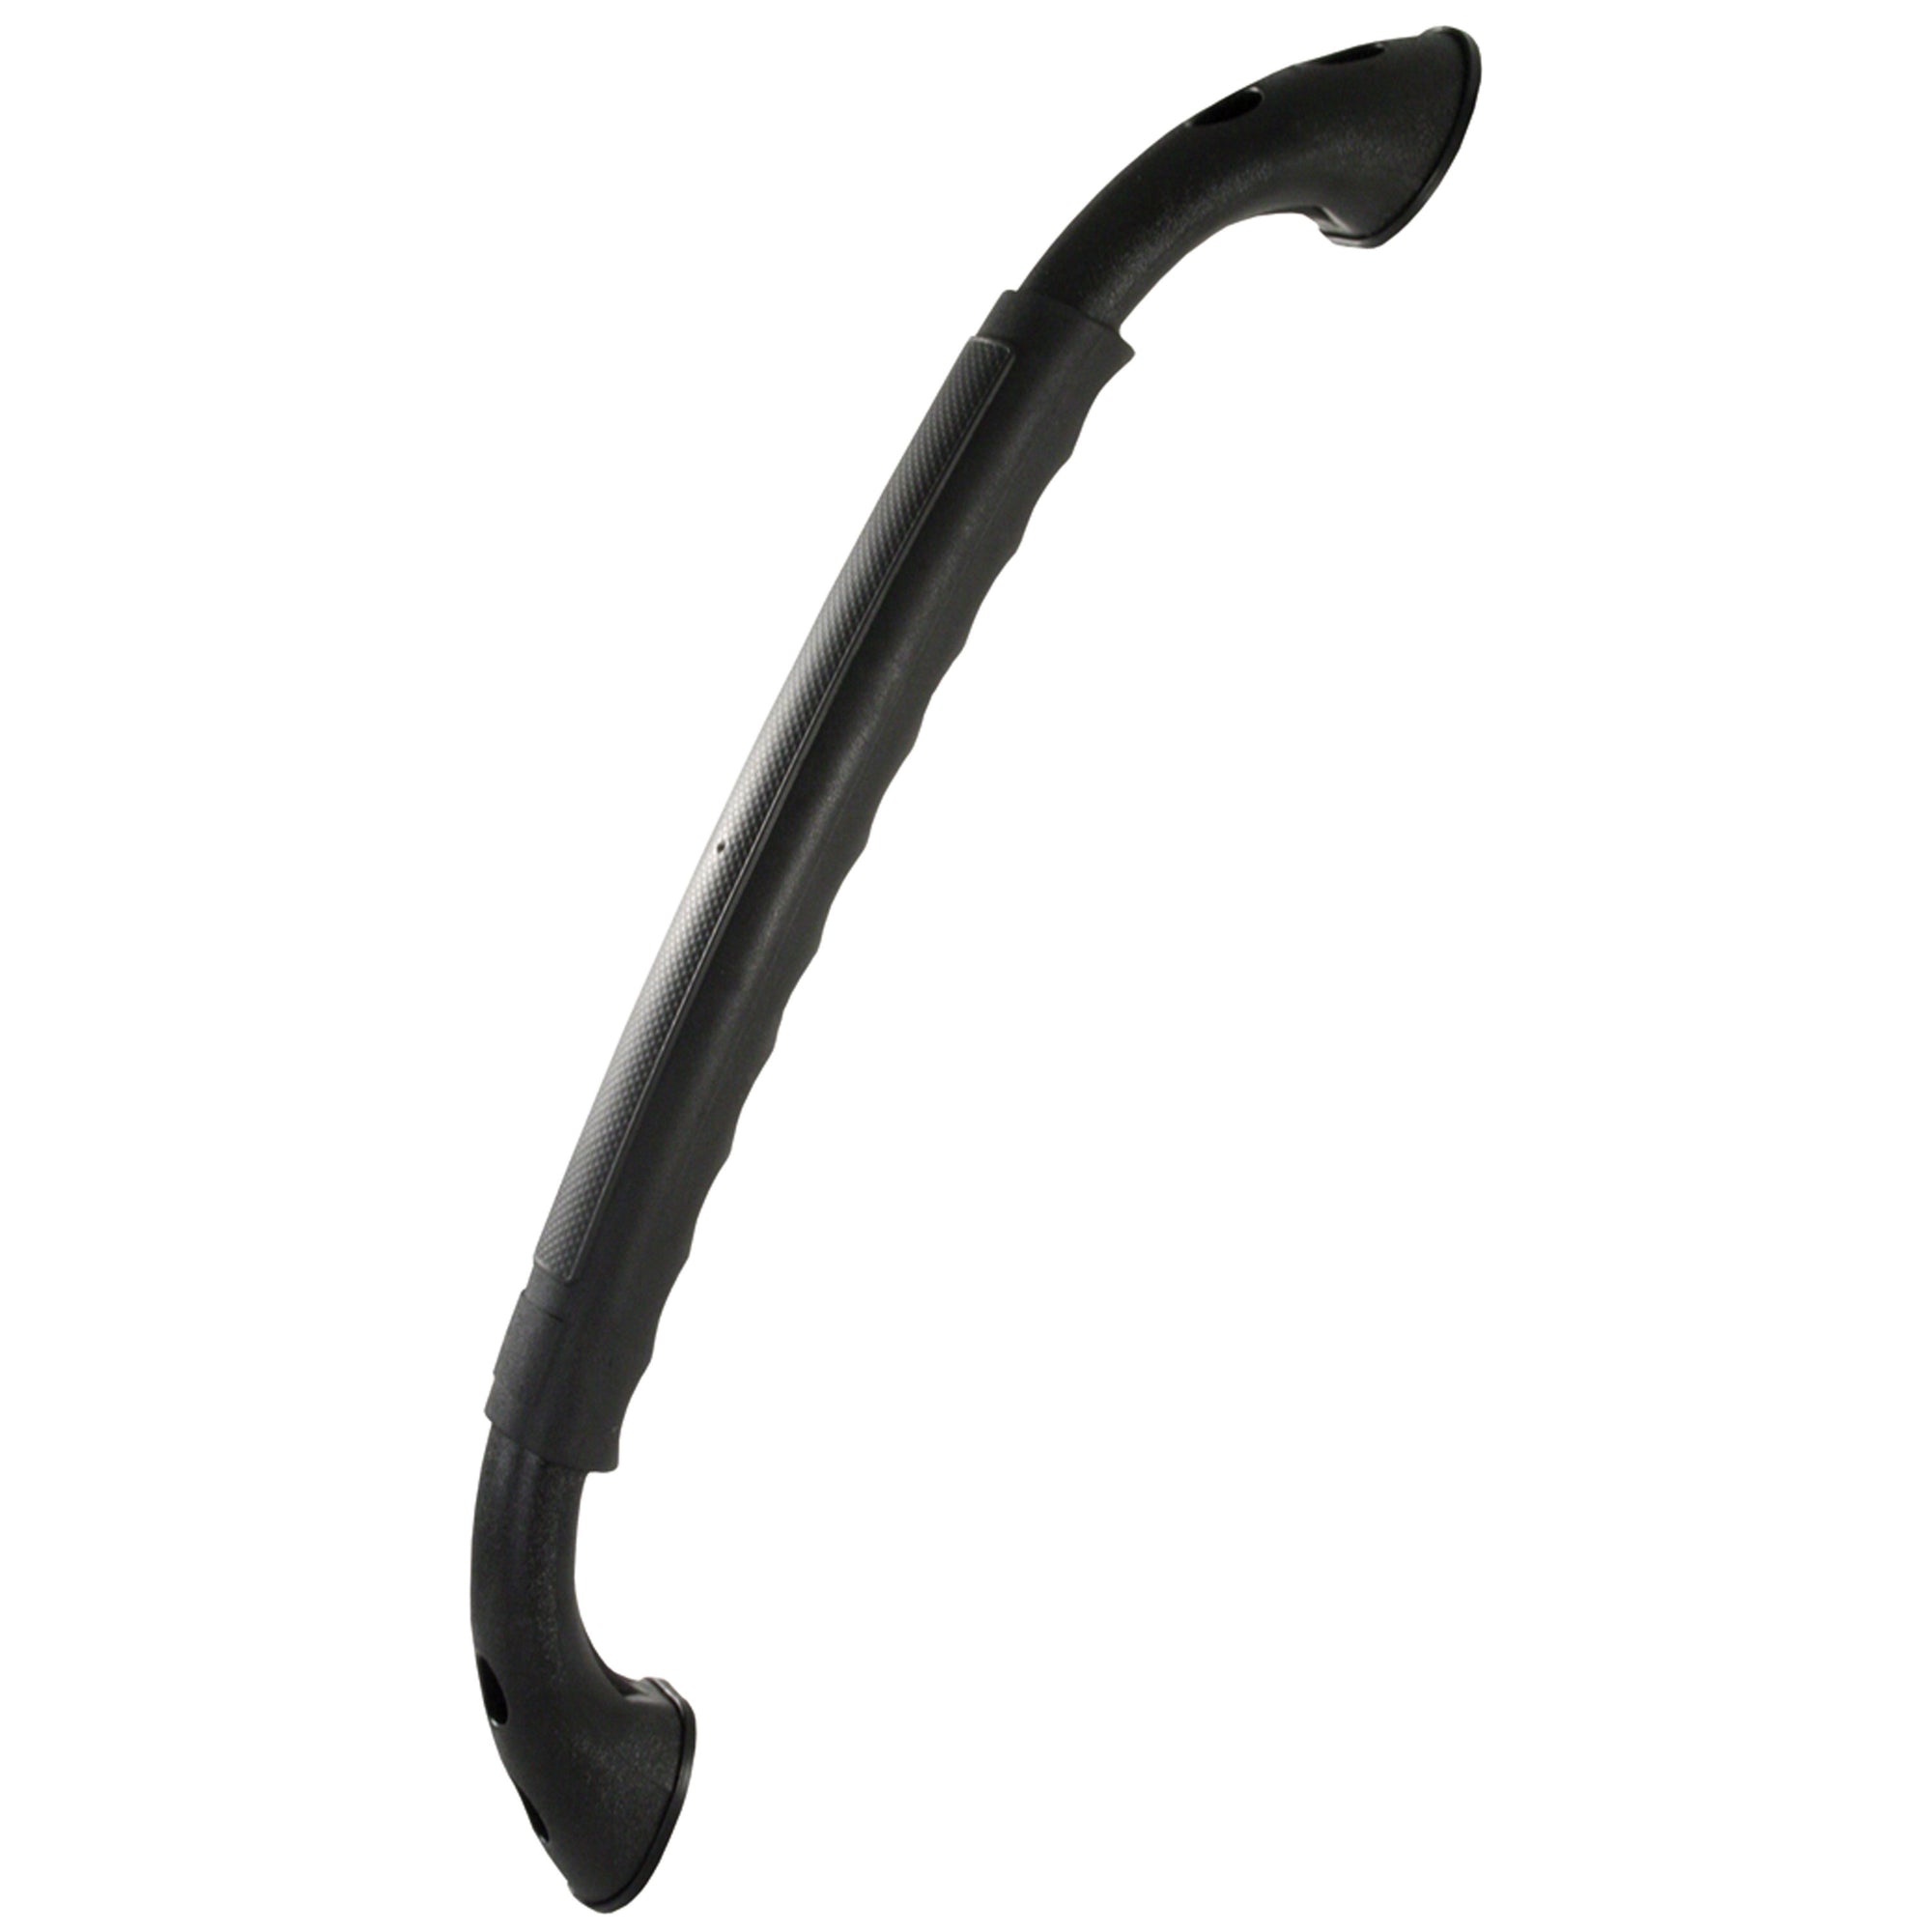 JR Products 48325 Deluxe Assist Handle - Black